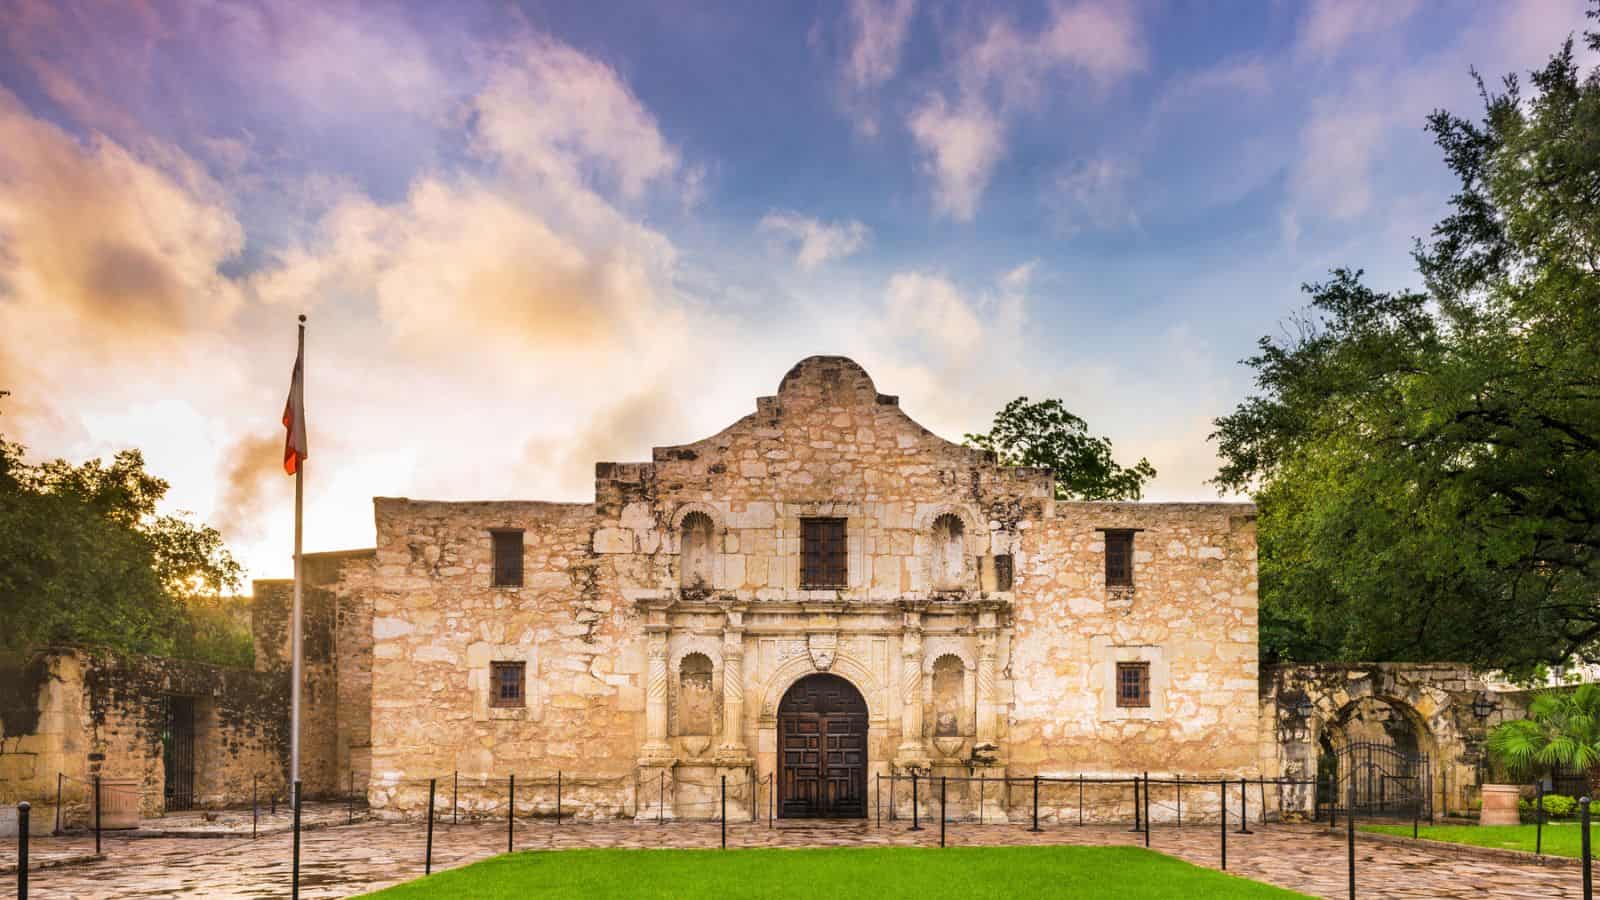 <p>You’ve heard that you should “remember the Alamo,” but we say you can go ahead and forget this overrated site. The size of the site is a letdown, and it lacks the grandeur you’d expect from such a famous landmark. The crowds can be overwhelming, making it difficult to truly appreciate the historical significance. </p> <p>The San Antonio area has more interesting and engaging historical sites that are worth your time and enthusiasm. Save yourself the disappointment and explore other attractions instead.</p>